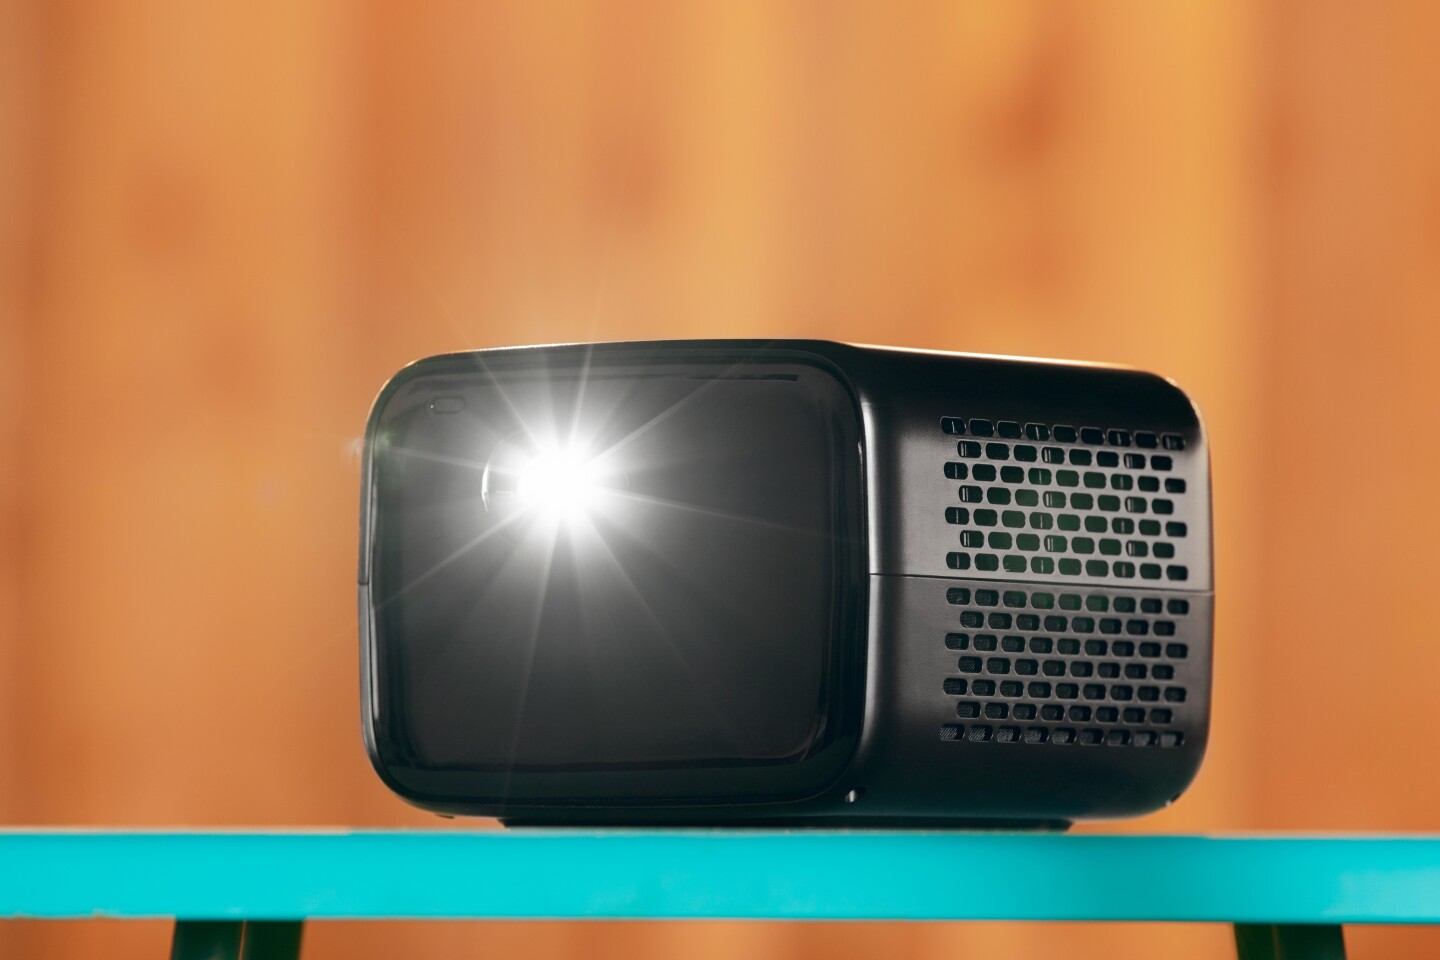 The PicoPix Max TV projector has a rated brightness of 900 ANSI lumens